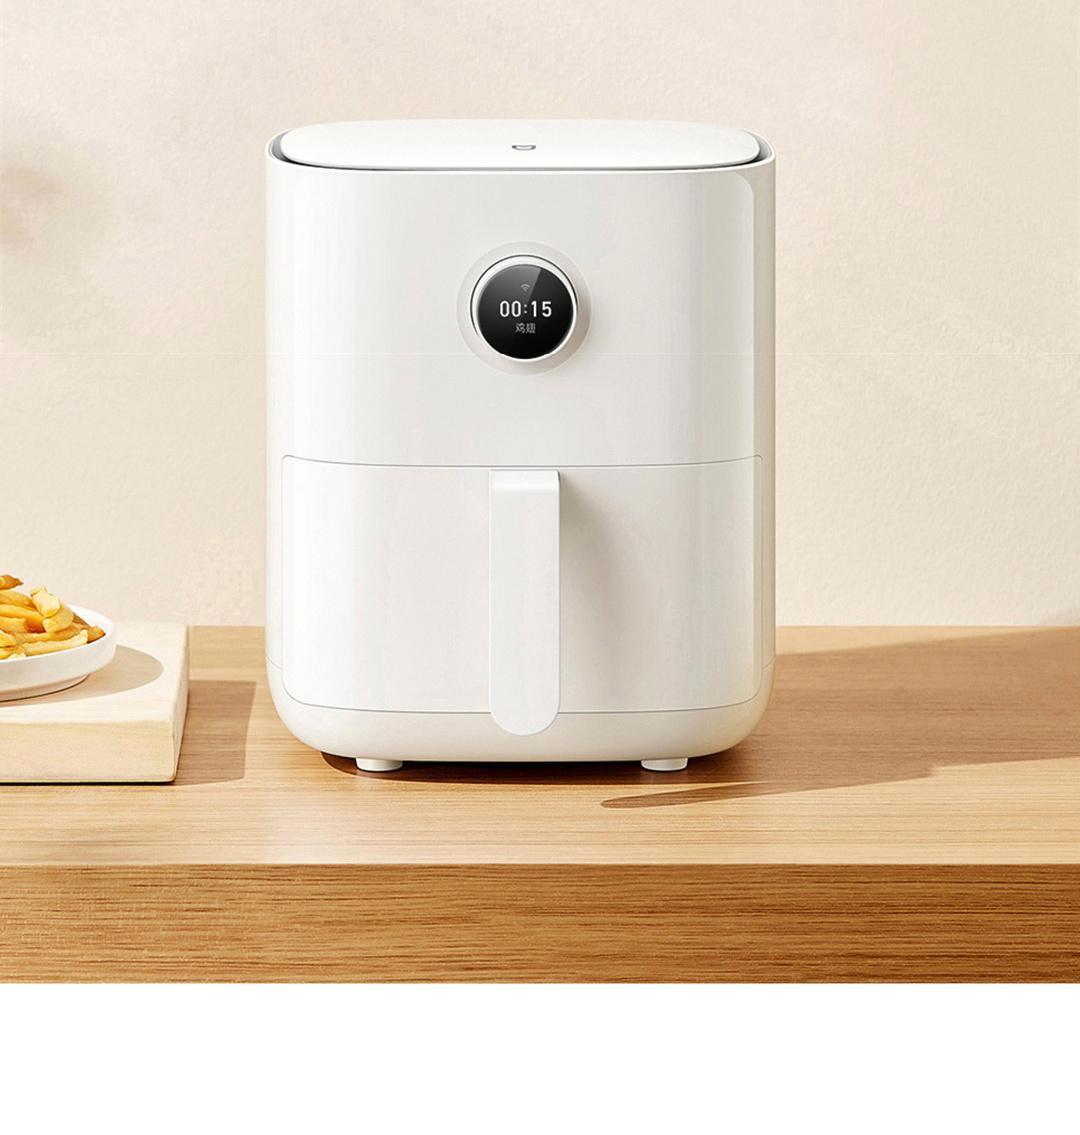 Smart Air Fryer 3.5L Healthy Oil-free Multi-function Food Processor Support WIFI 24 Hours Appointment Timing